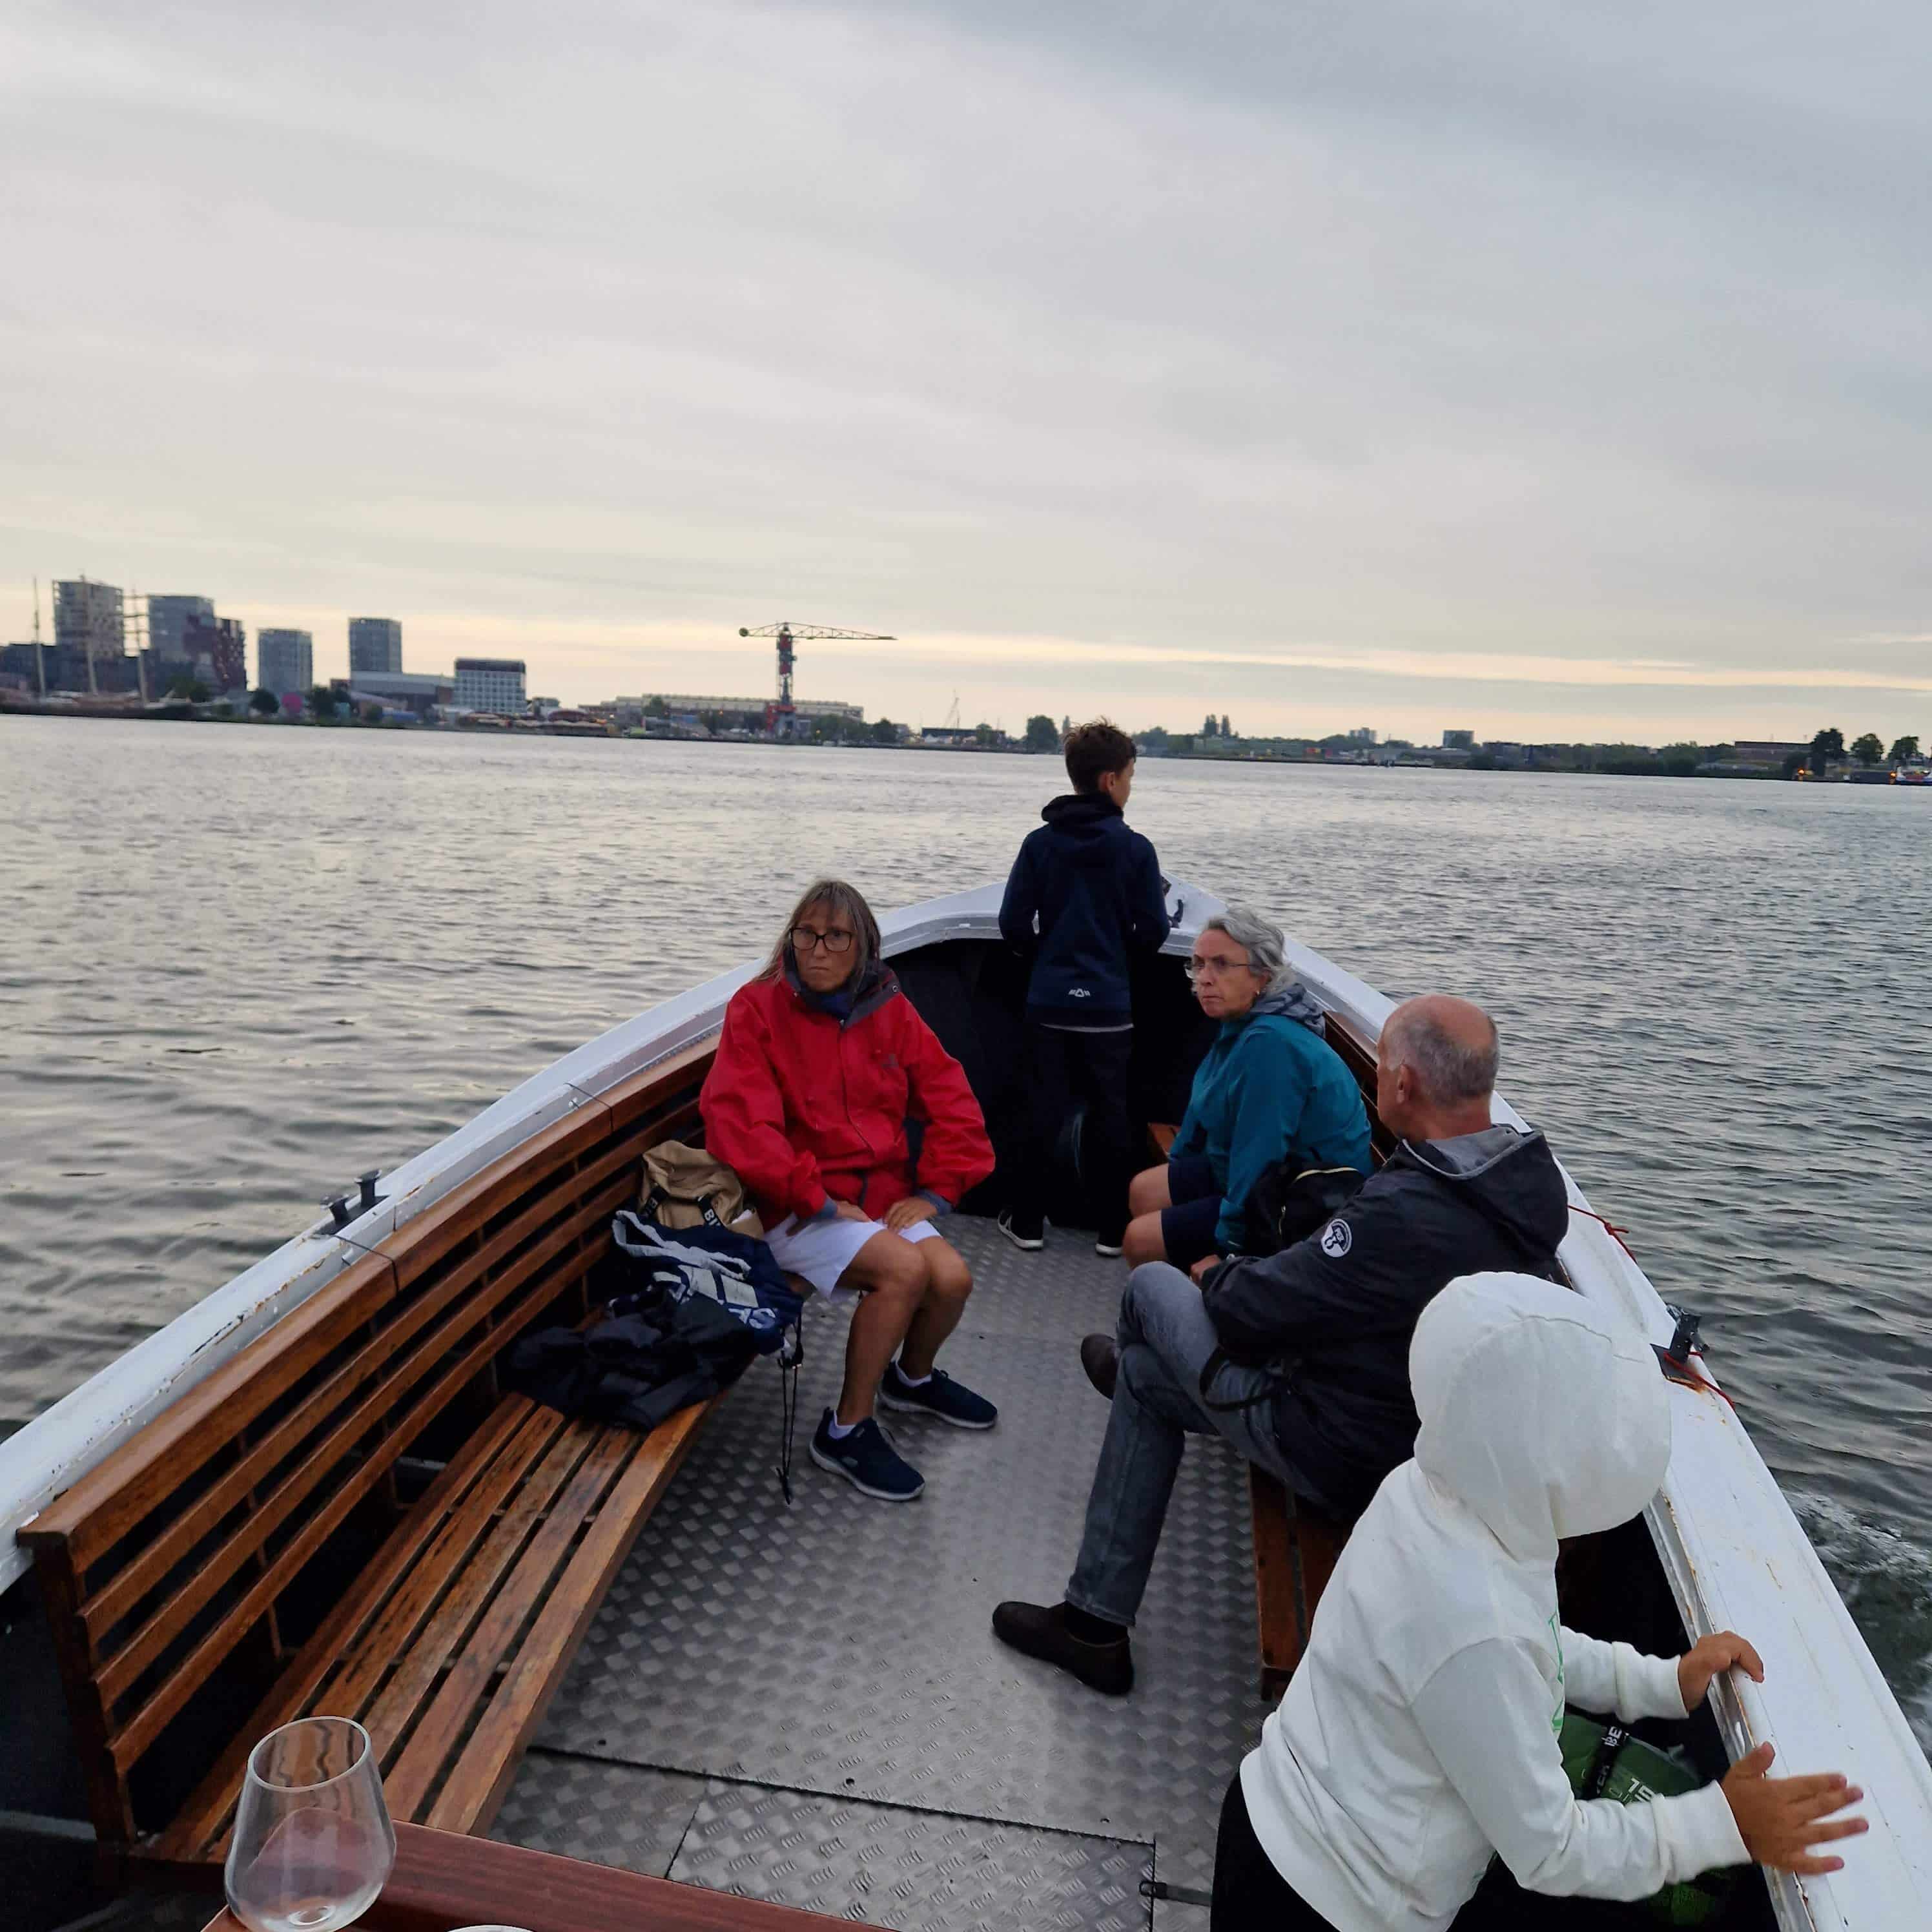 Passengers enjoying a serene evening boat tour on Amsterdam's expansive waterways with city skyline in the background